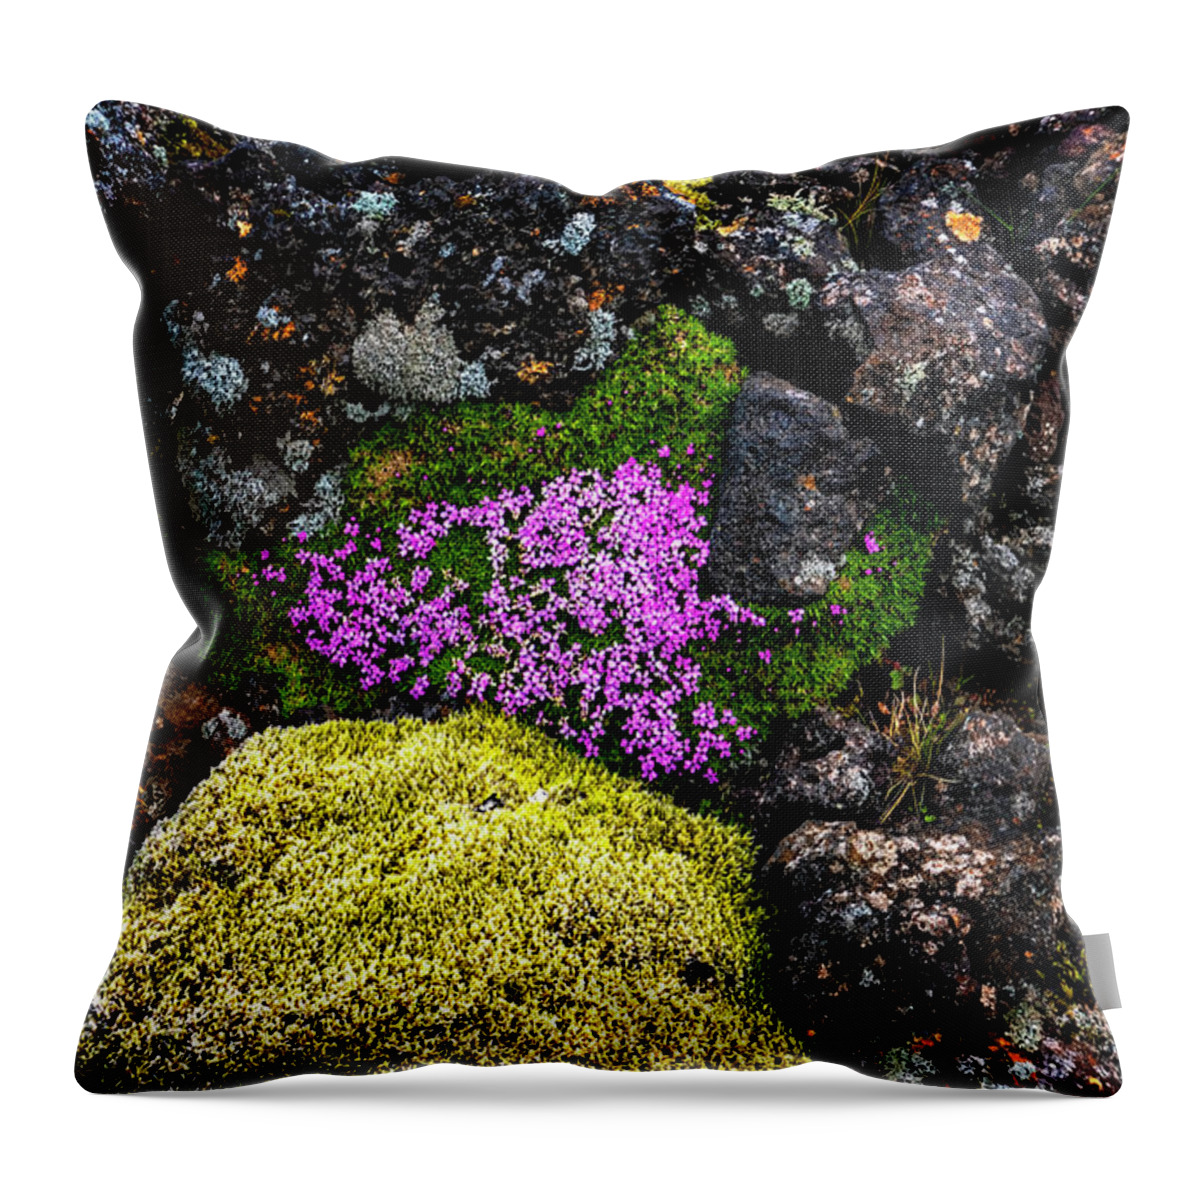 Iceland Throw Pillow featuring the photograph Lava Rocks And Flowers by Tom Singleton